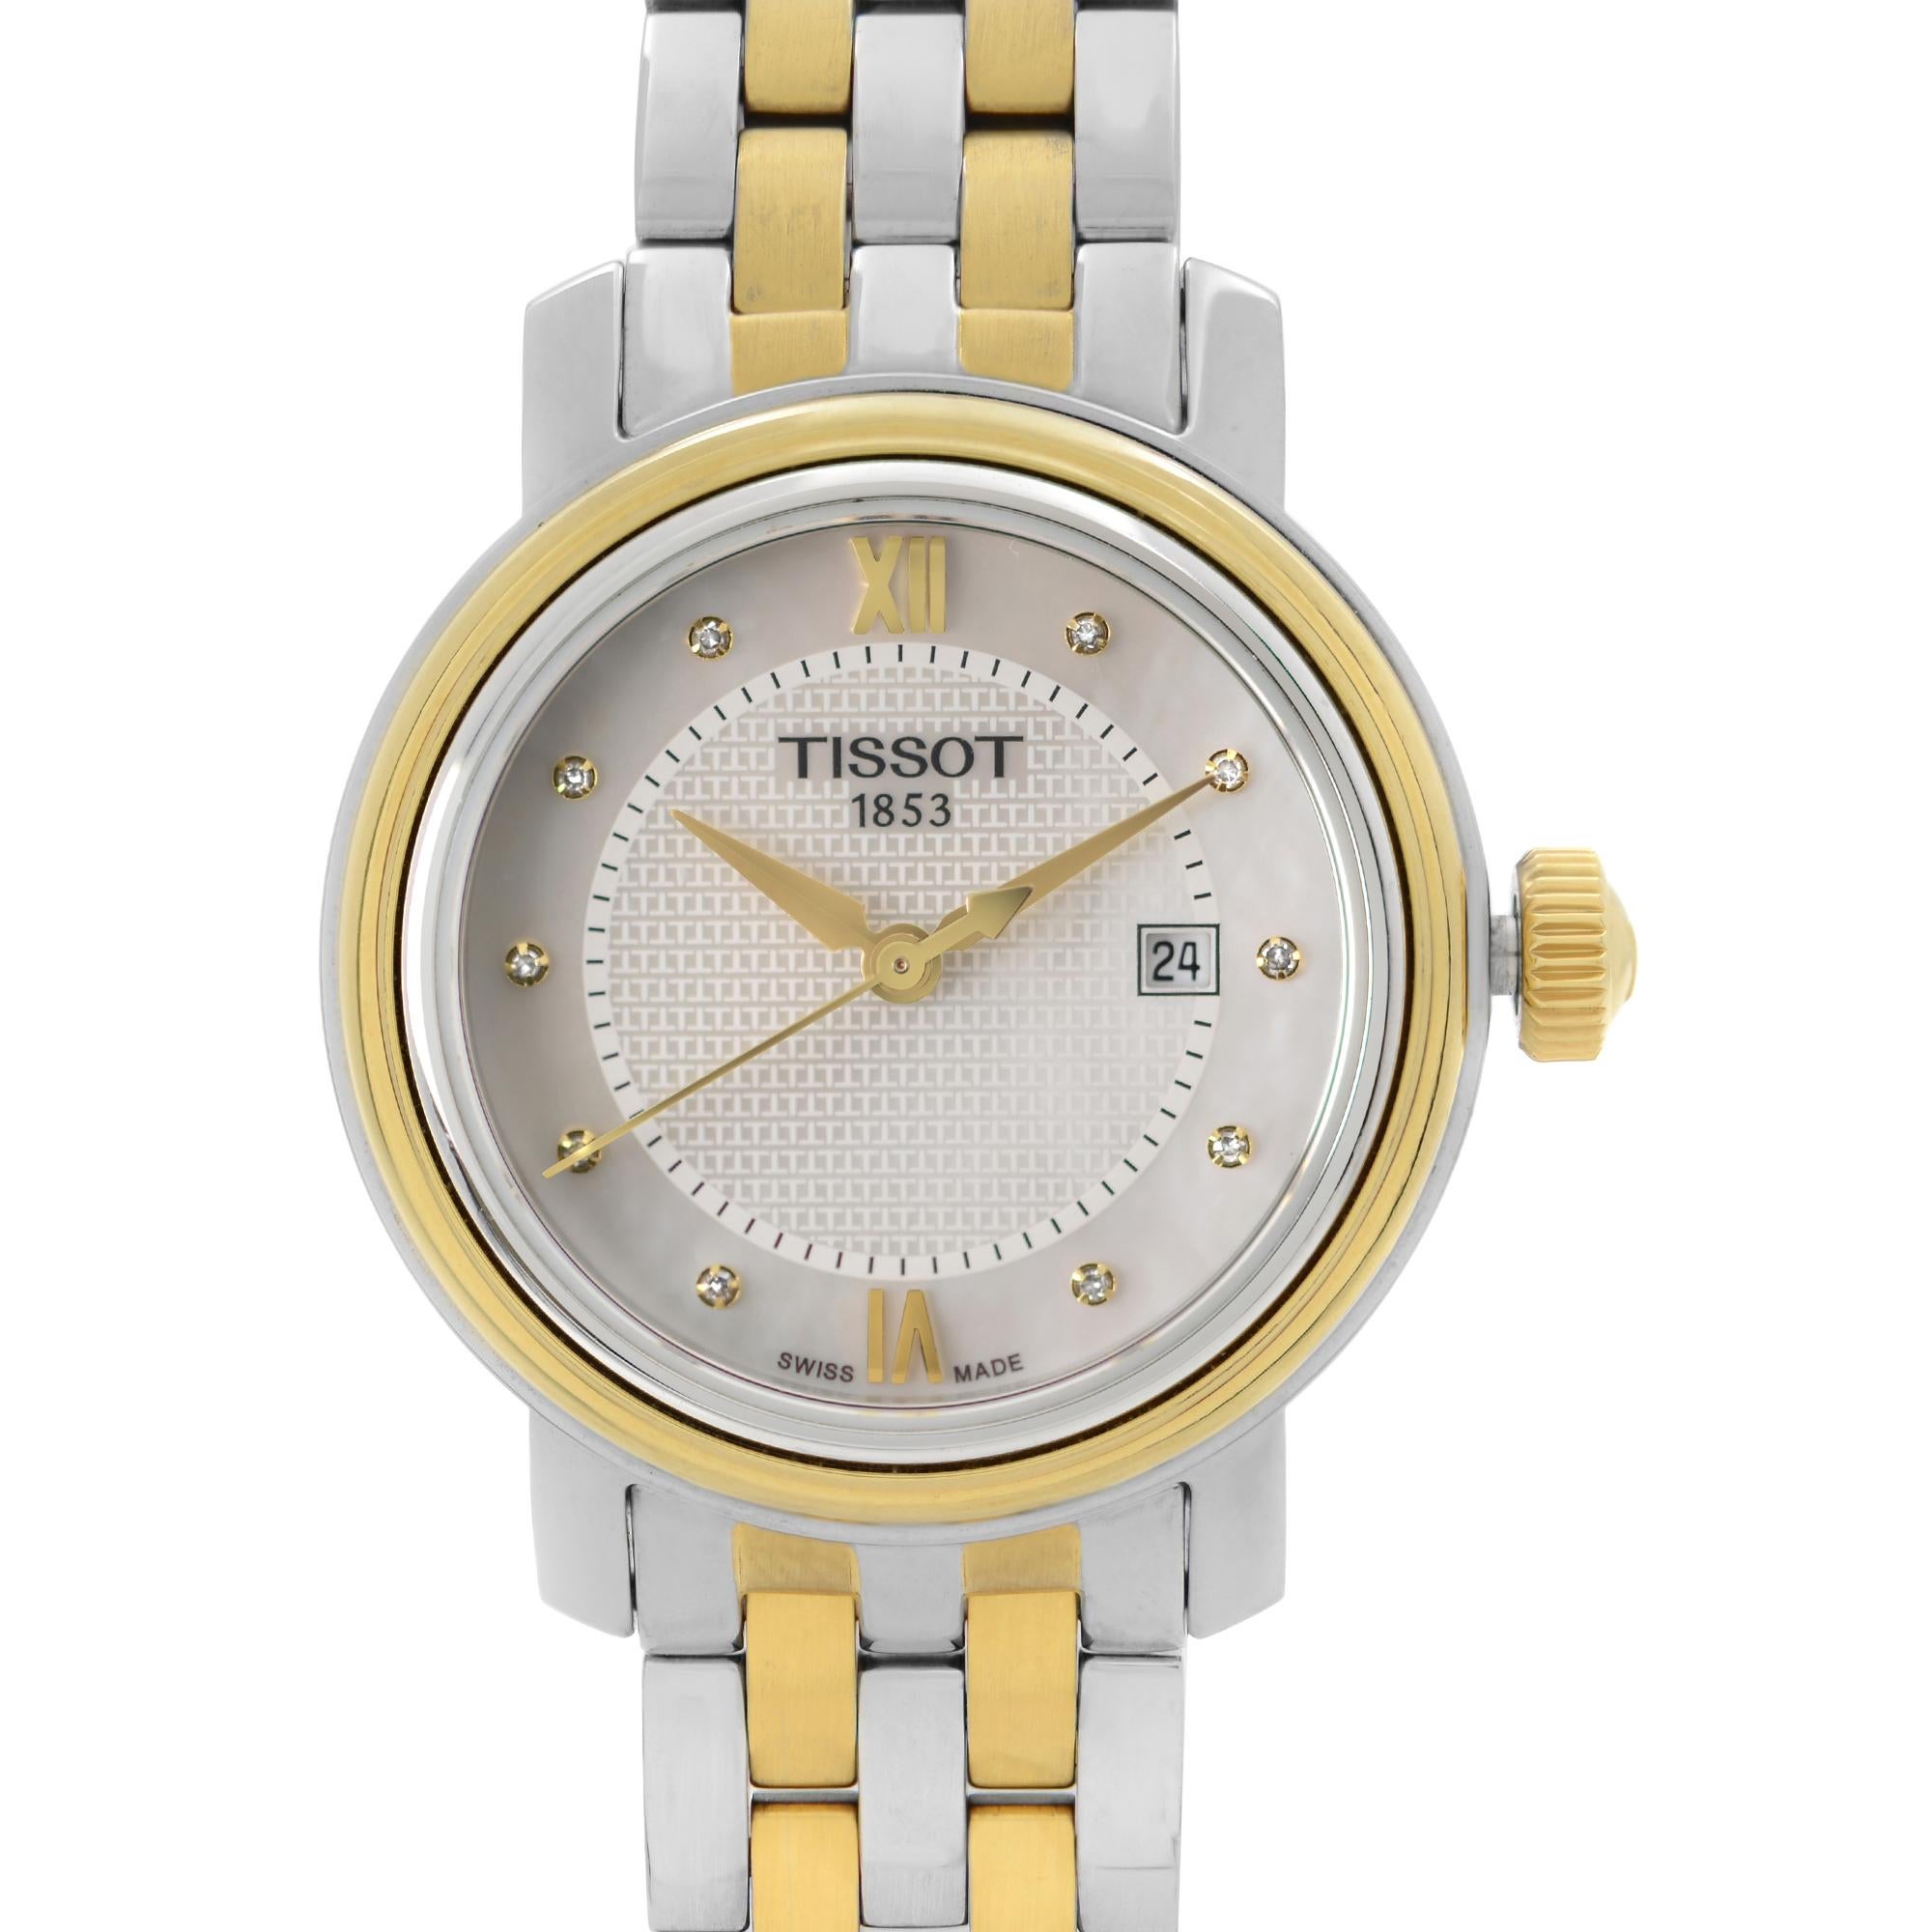 New with Defects Tissot Bridgeport T097.010.22.116.00. The Watch has Minor Blemishes on Gold Tone Parts and the Case Back. This Beautiful Timepiece is Powered by Quartz (Battery) Movement and Features: Stainless Steel Case with a Two-Tone